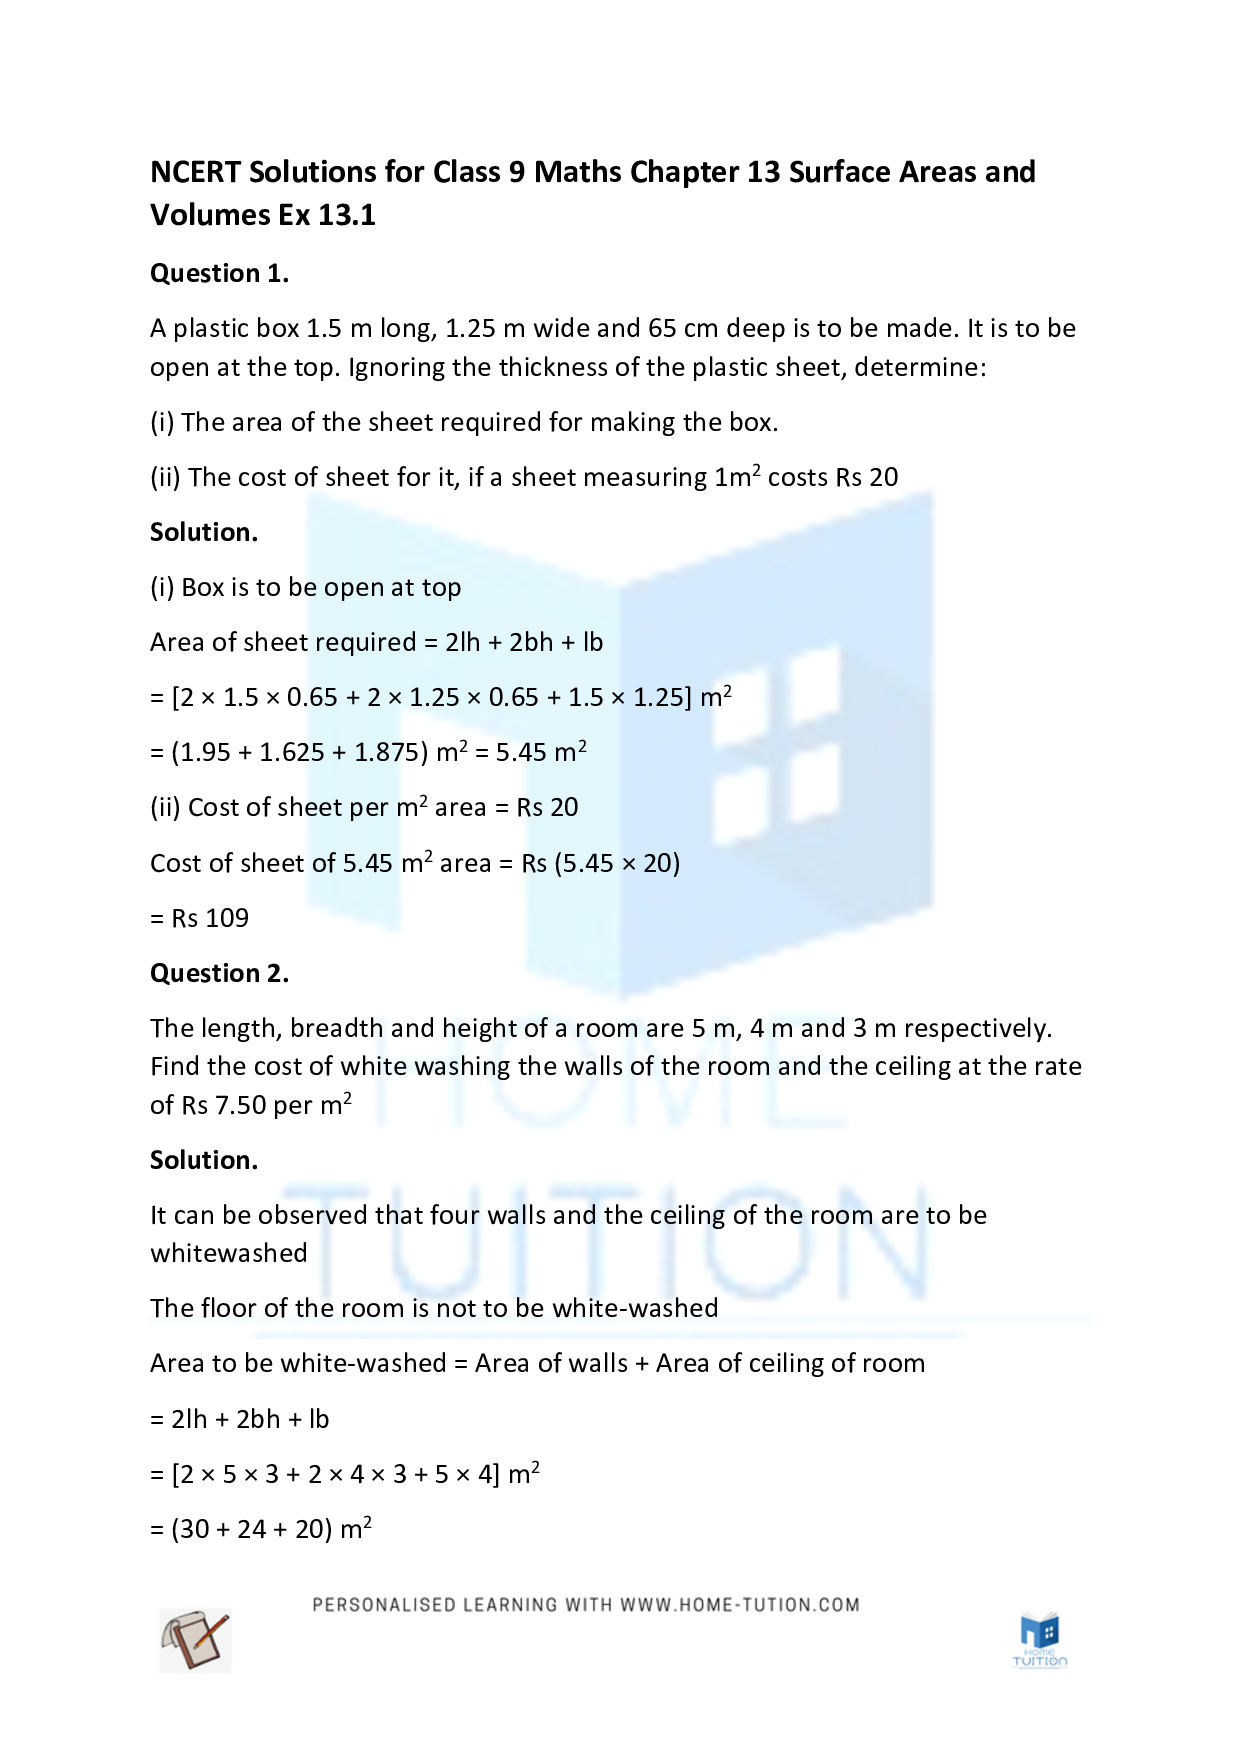 Class 9 Maths Chapter 13 Surface Areas and Volumes